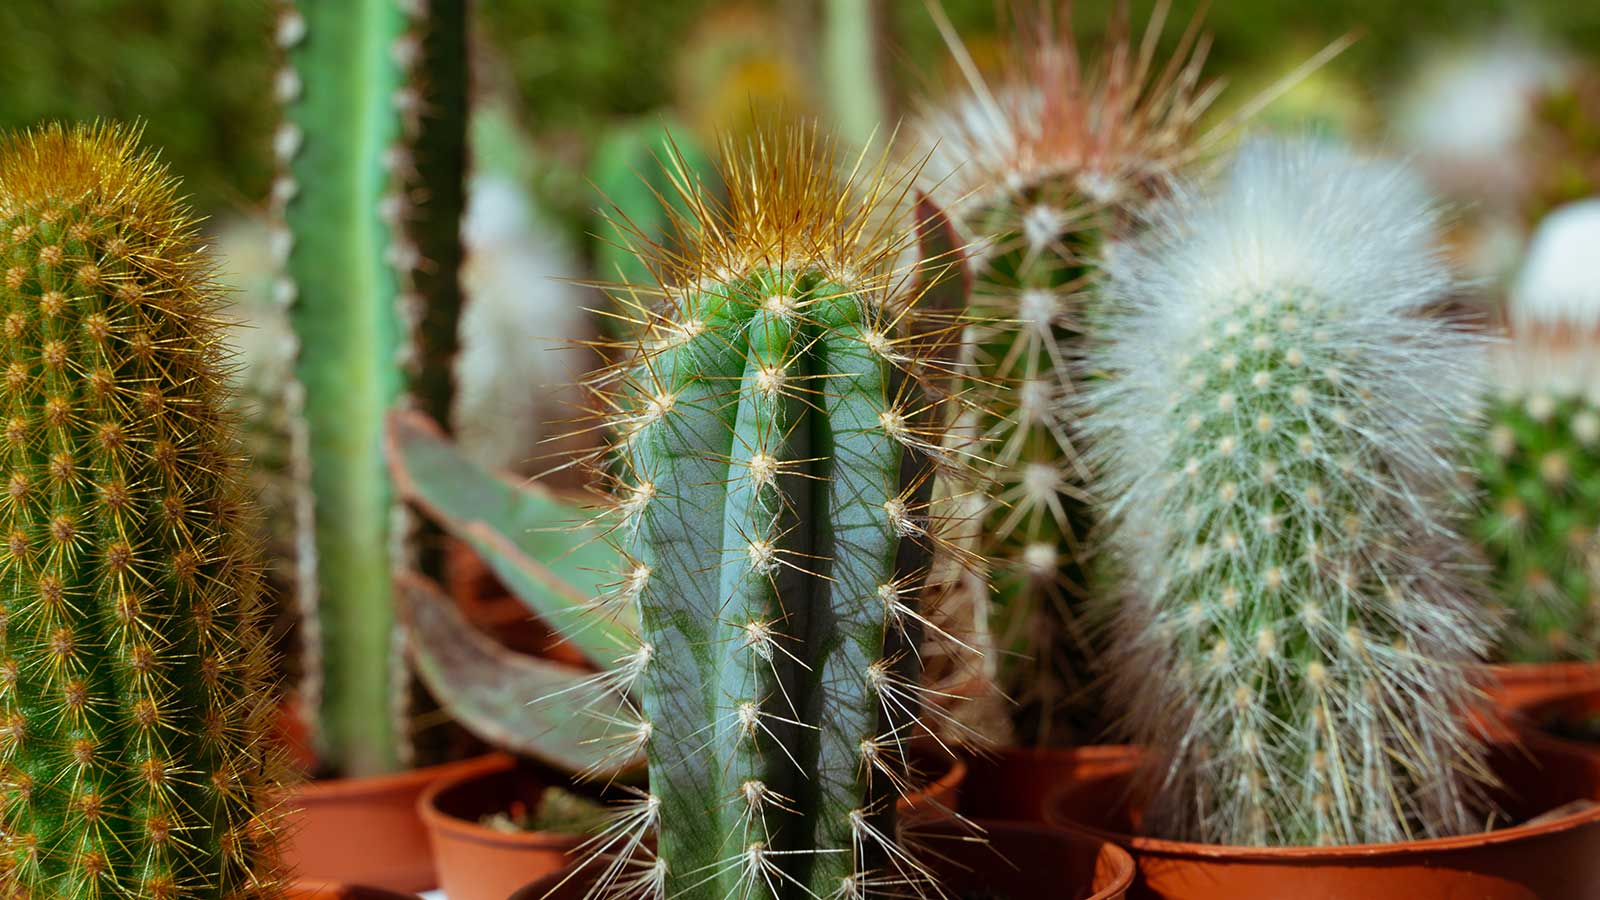 Why is my cactus turning brown? Reasons and solutions